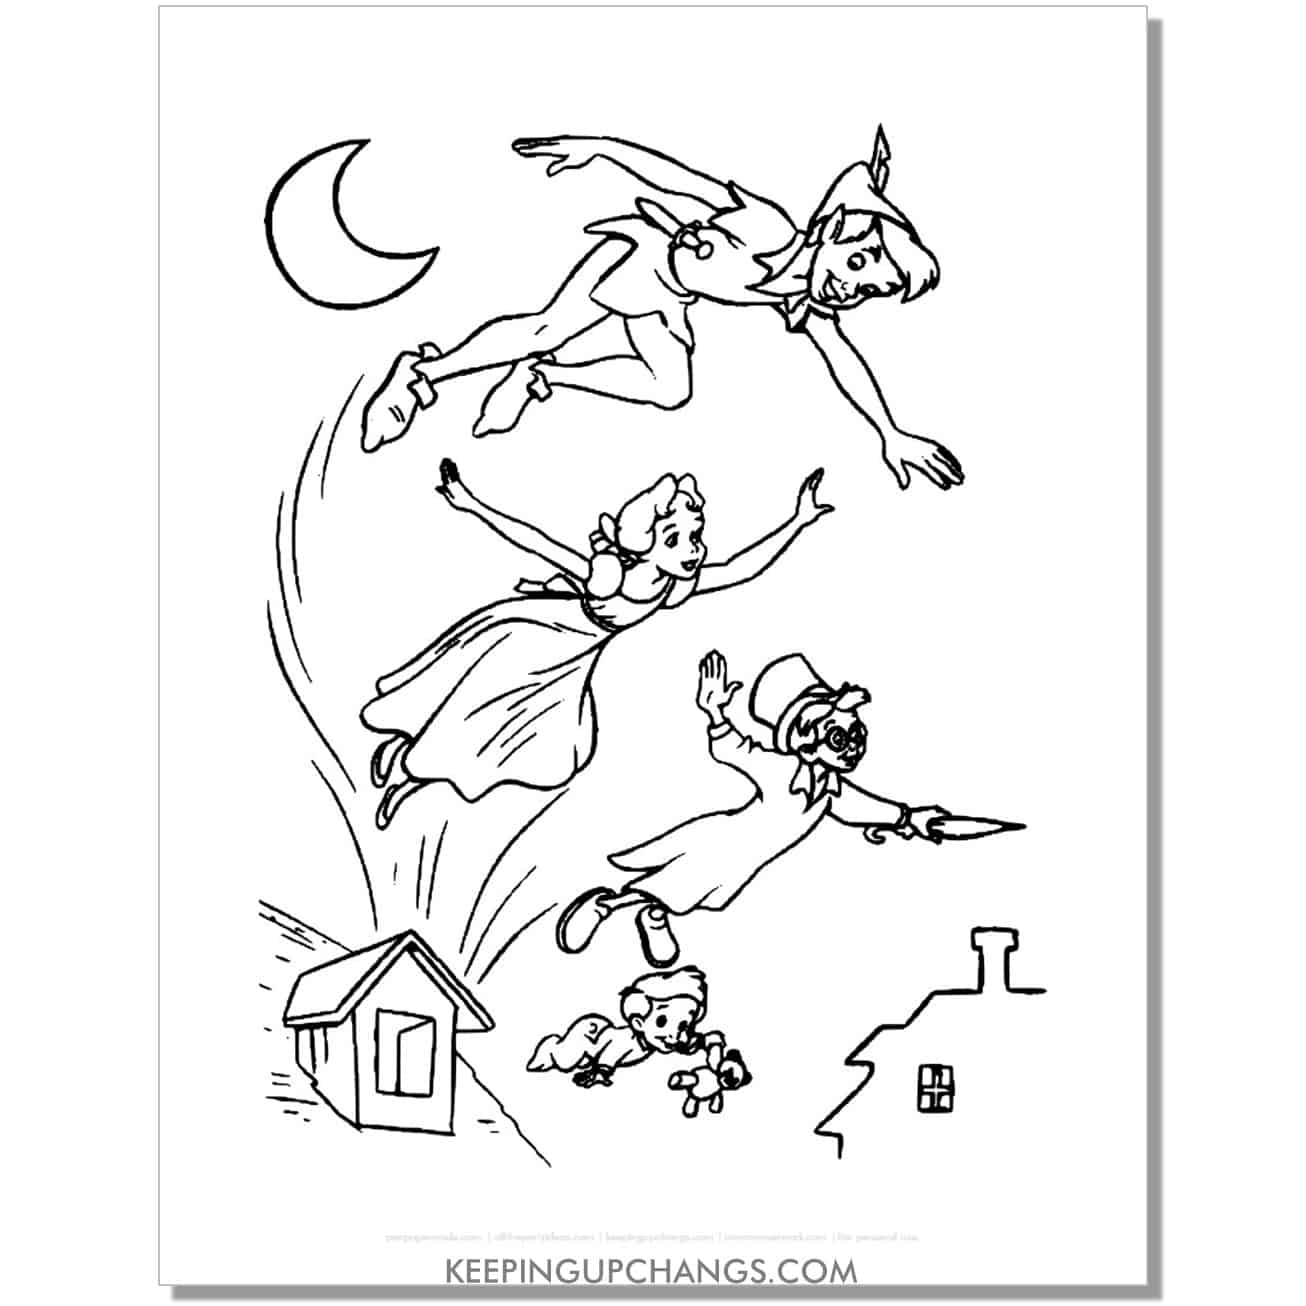 peter pan flies out of bedroom window with wendy, michael, john darling coloring page, sheet.